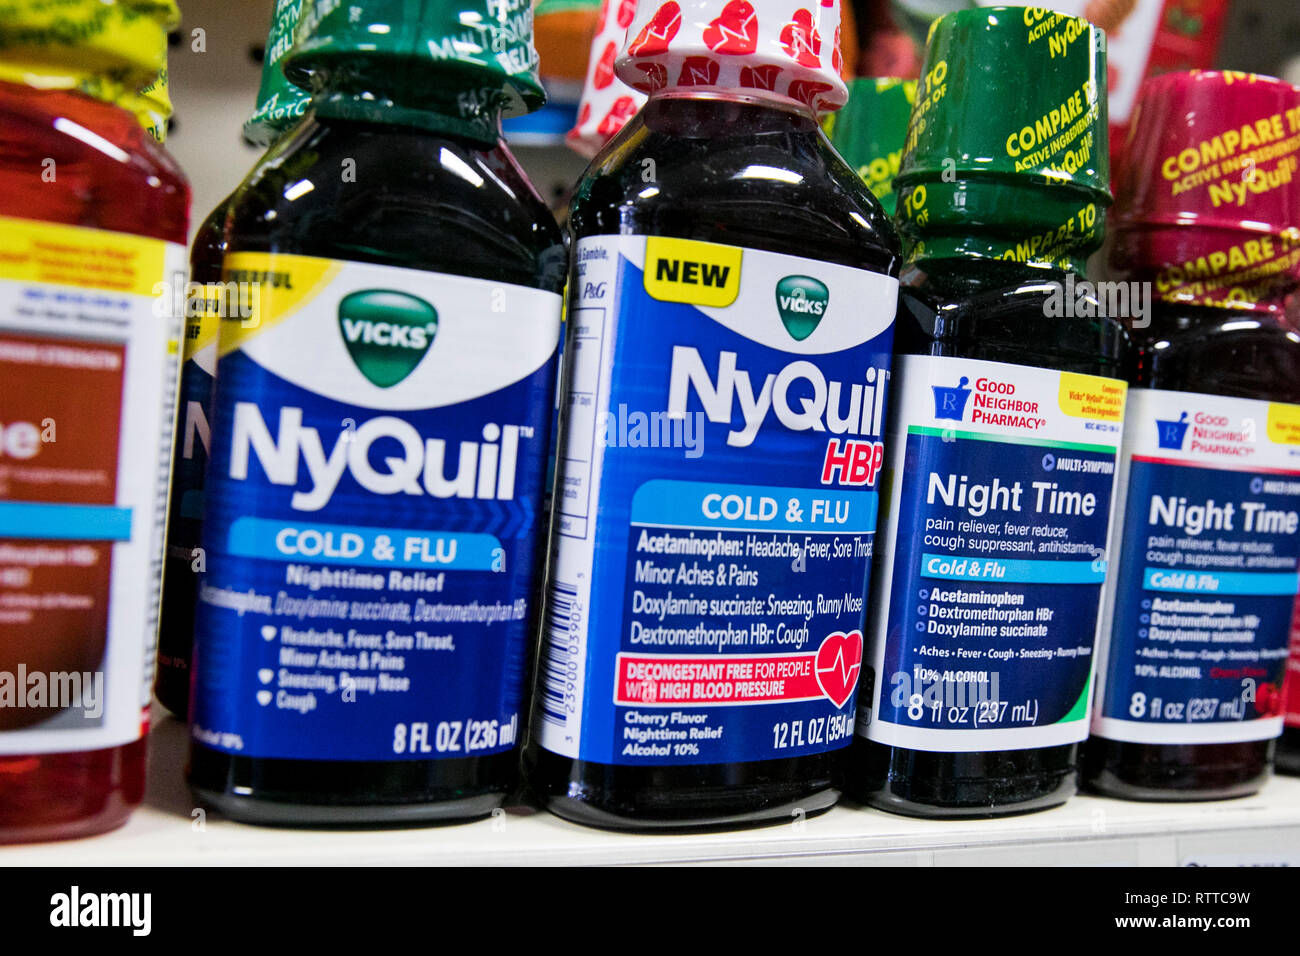 E NyQuil DayQuil over-the-counter medicina fredda fotografato. Foto Stock